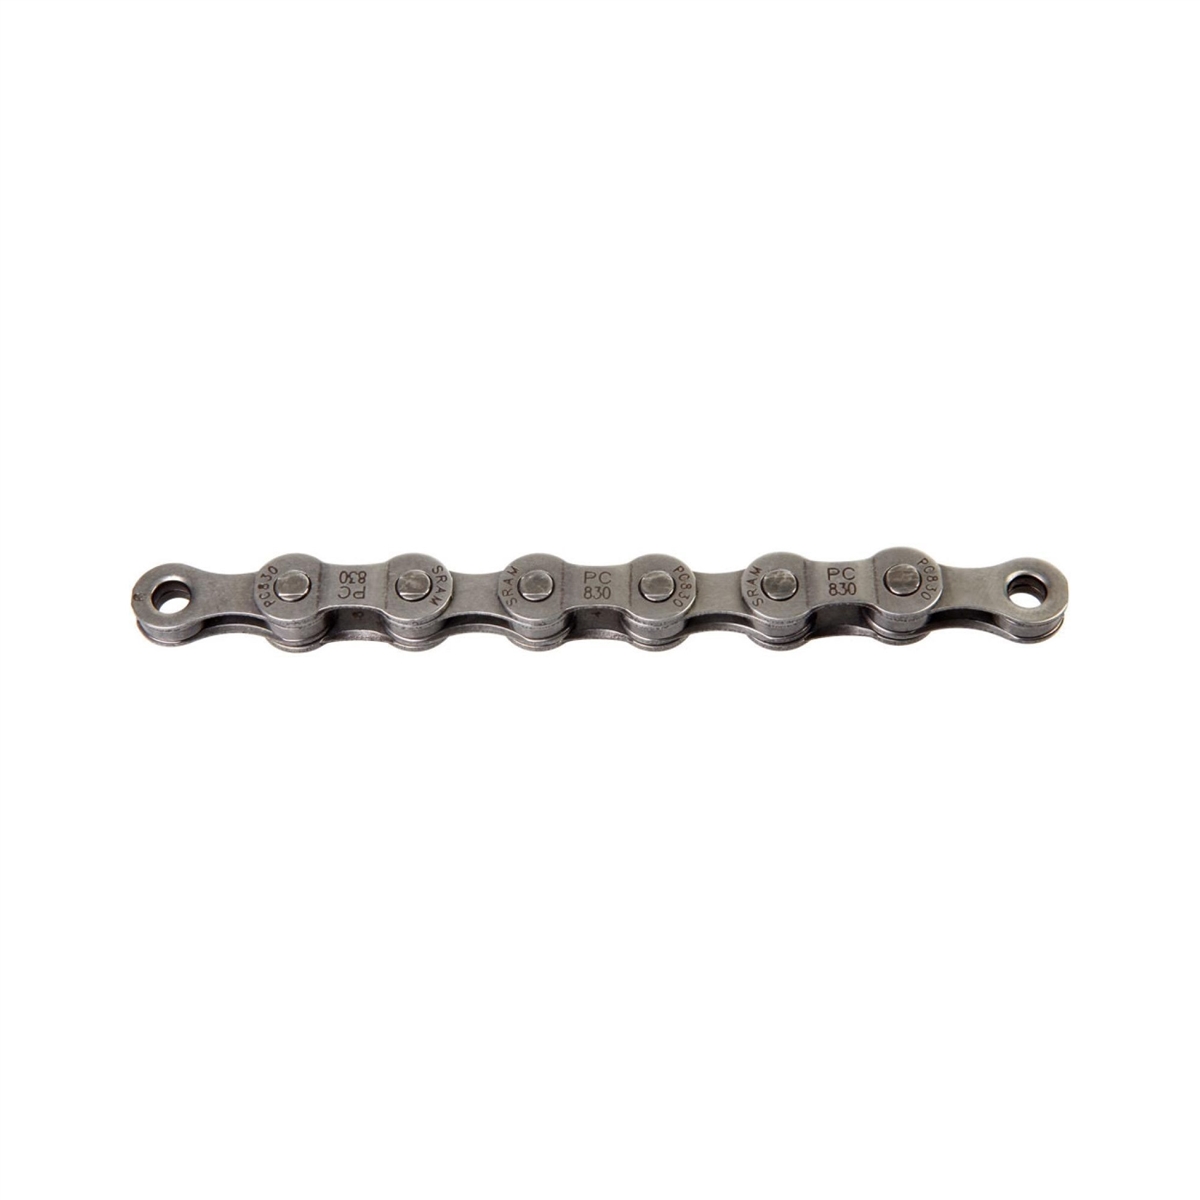 Chain PC 830 8s 114 links Silver PowerLink Included